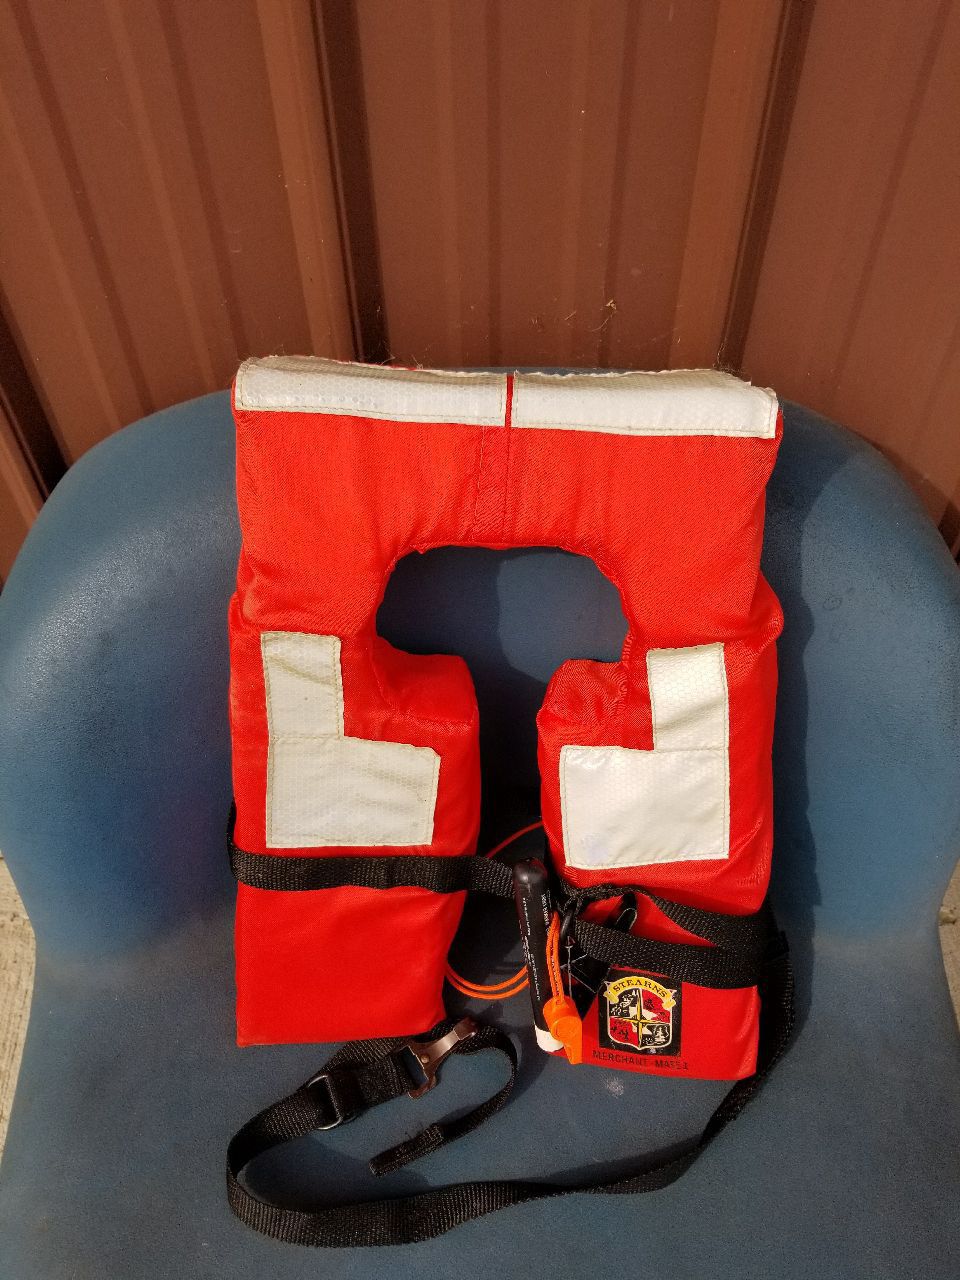 Coast Guard life preservers...have 10 each for sale...child sizes also